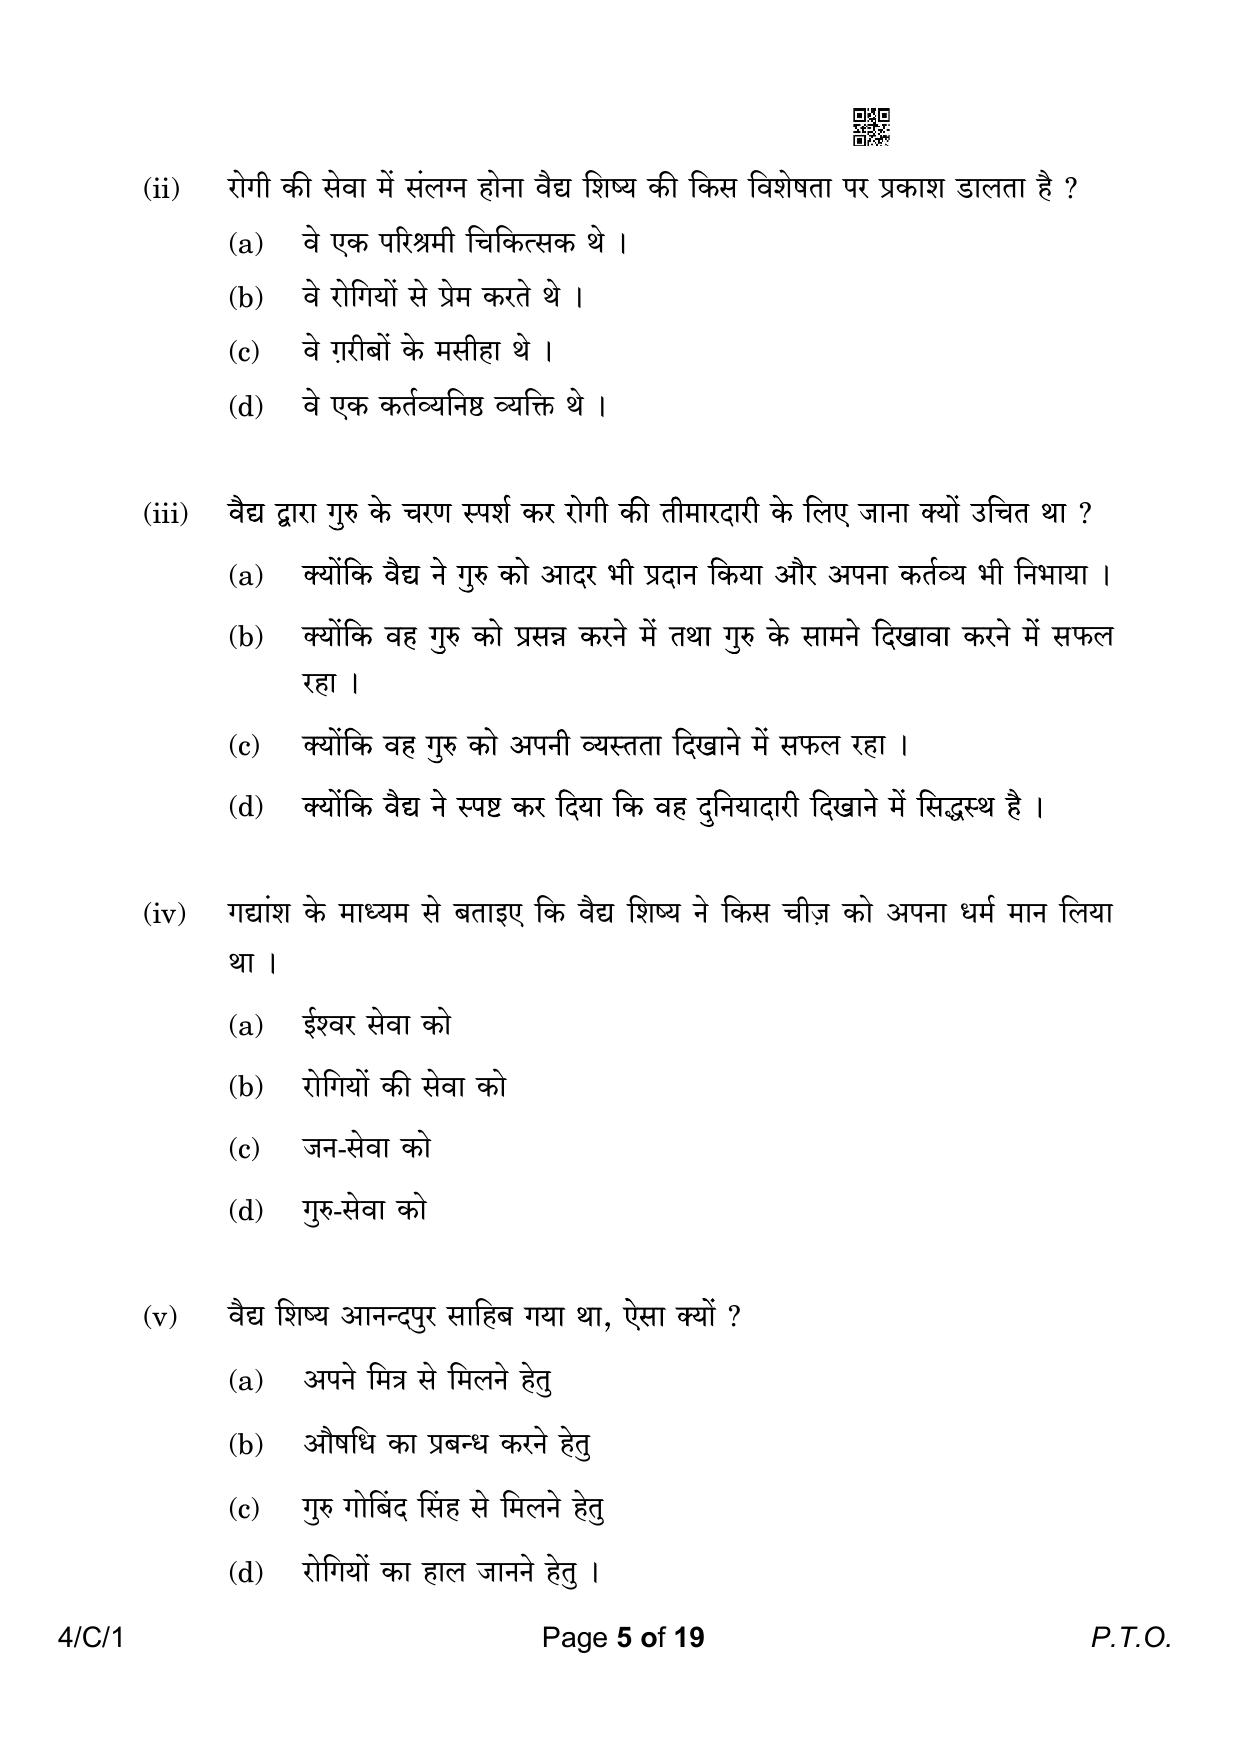 CBSE Class 10 4-1 Hindi B 2023 (Compartment) Question Paper - Page 5